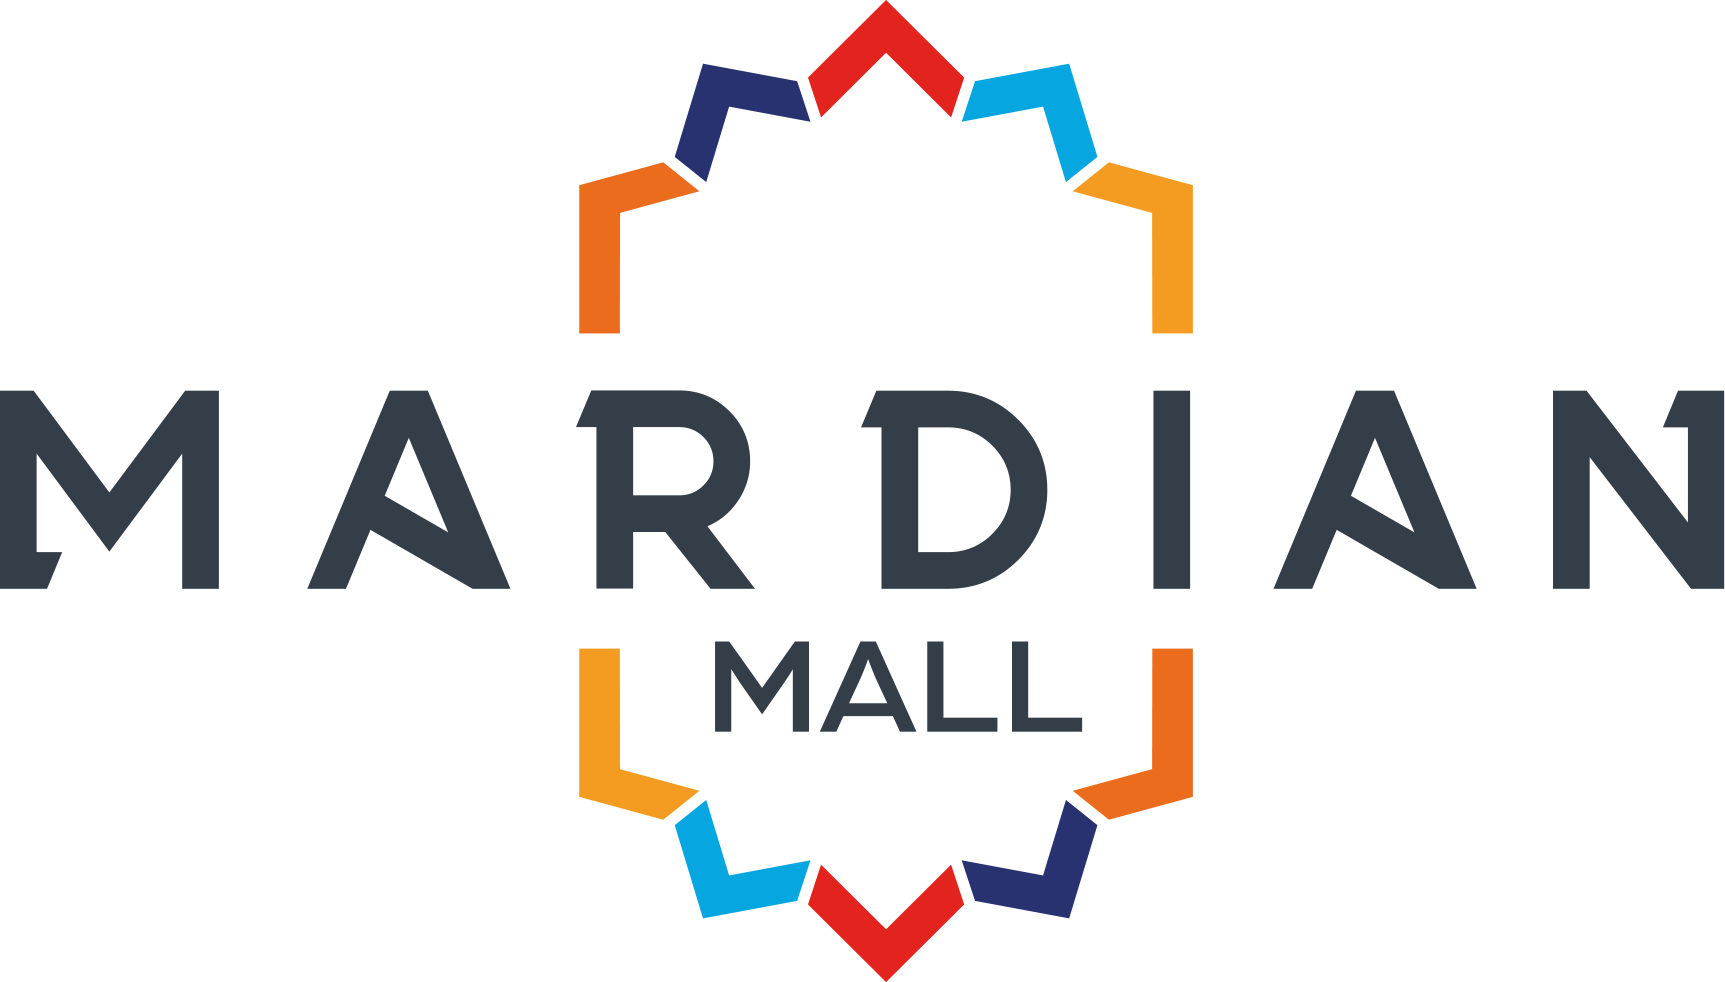 MADIAN MALL